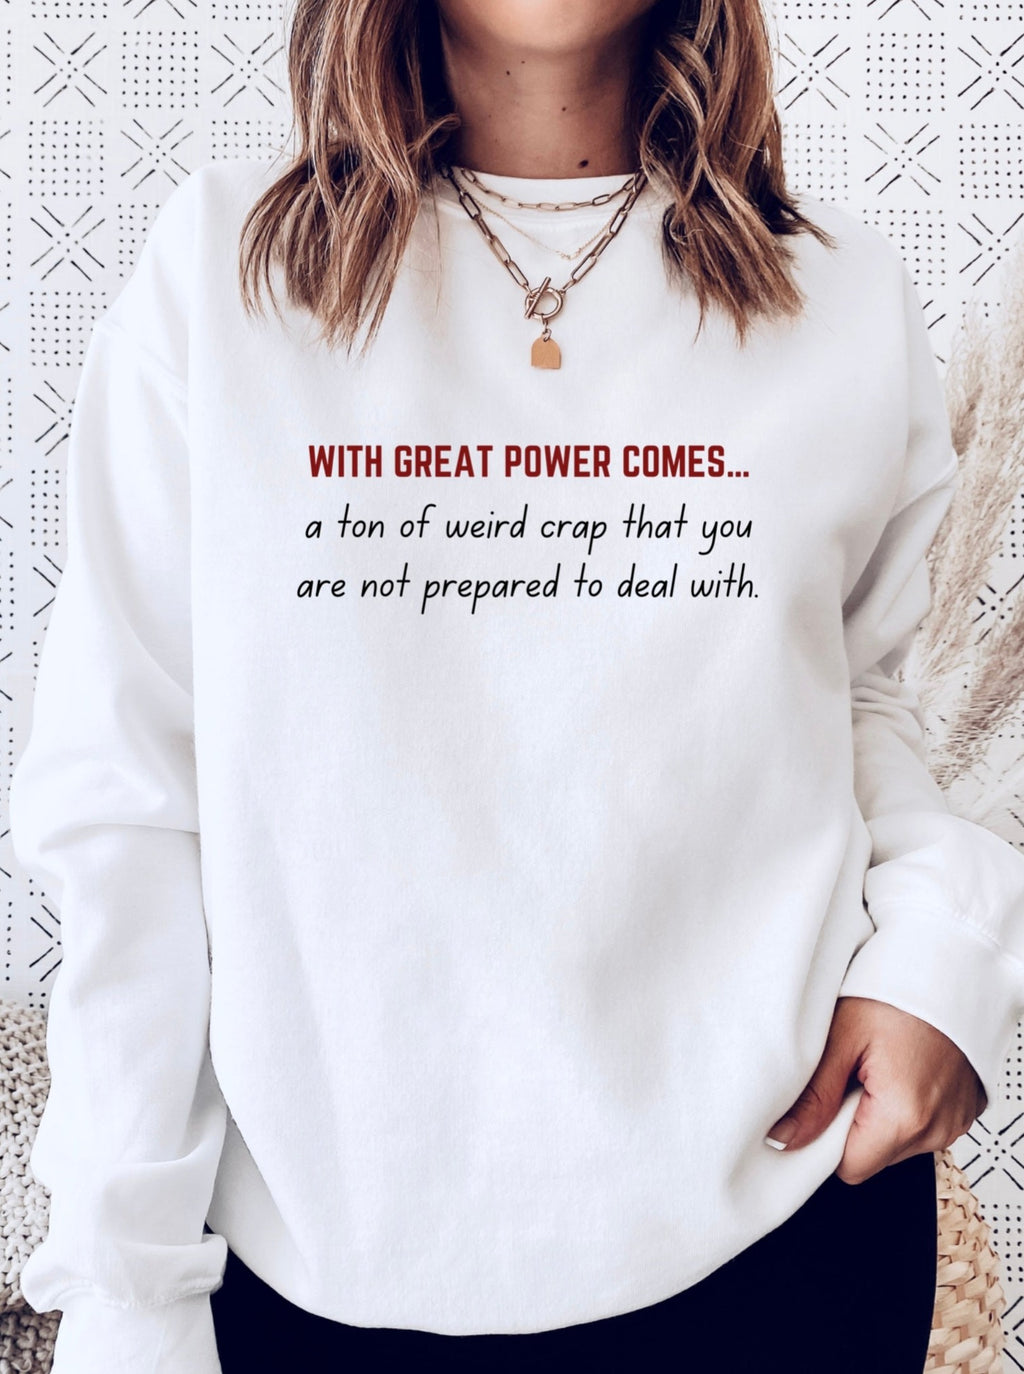 “With great power comes… a ton of weird crap that you are not prepared to deal with!” Marvel’s Agents of S.H.I.E.L.D. Daisy ‘Skye’ Johnson Spider-Man Crewneck Sweatshirt